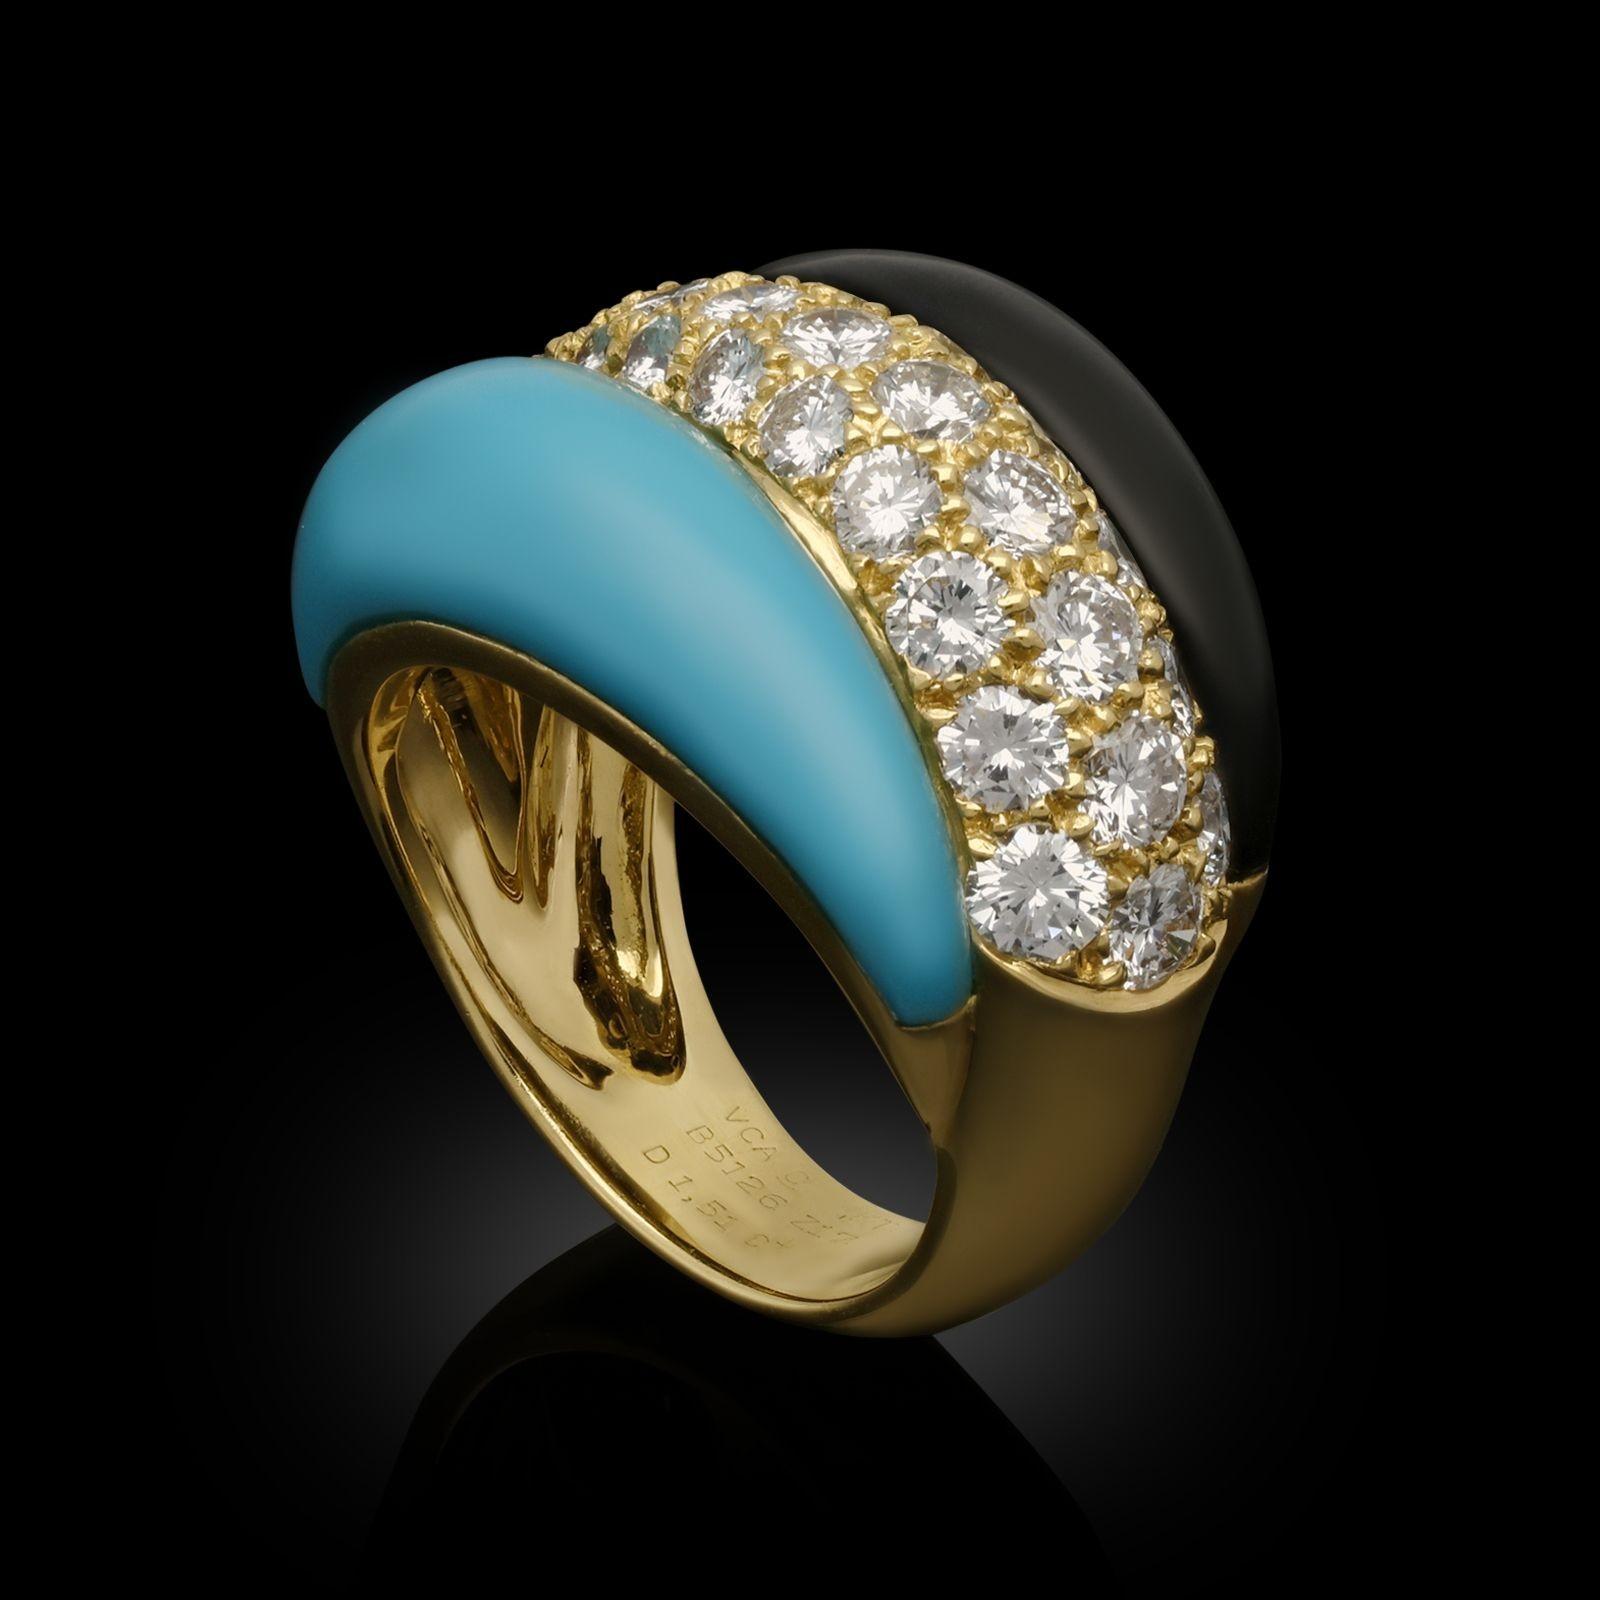 A stylish diamond, onyx and turquoise dress ring by Van Cleef & Arpels c.1990s, the ring of rounded bombe form and asymmetric design composed of three tapered sections one on top of the next, the central section pavé set with round brilliant